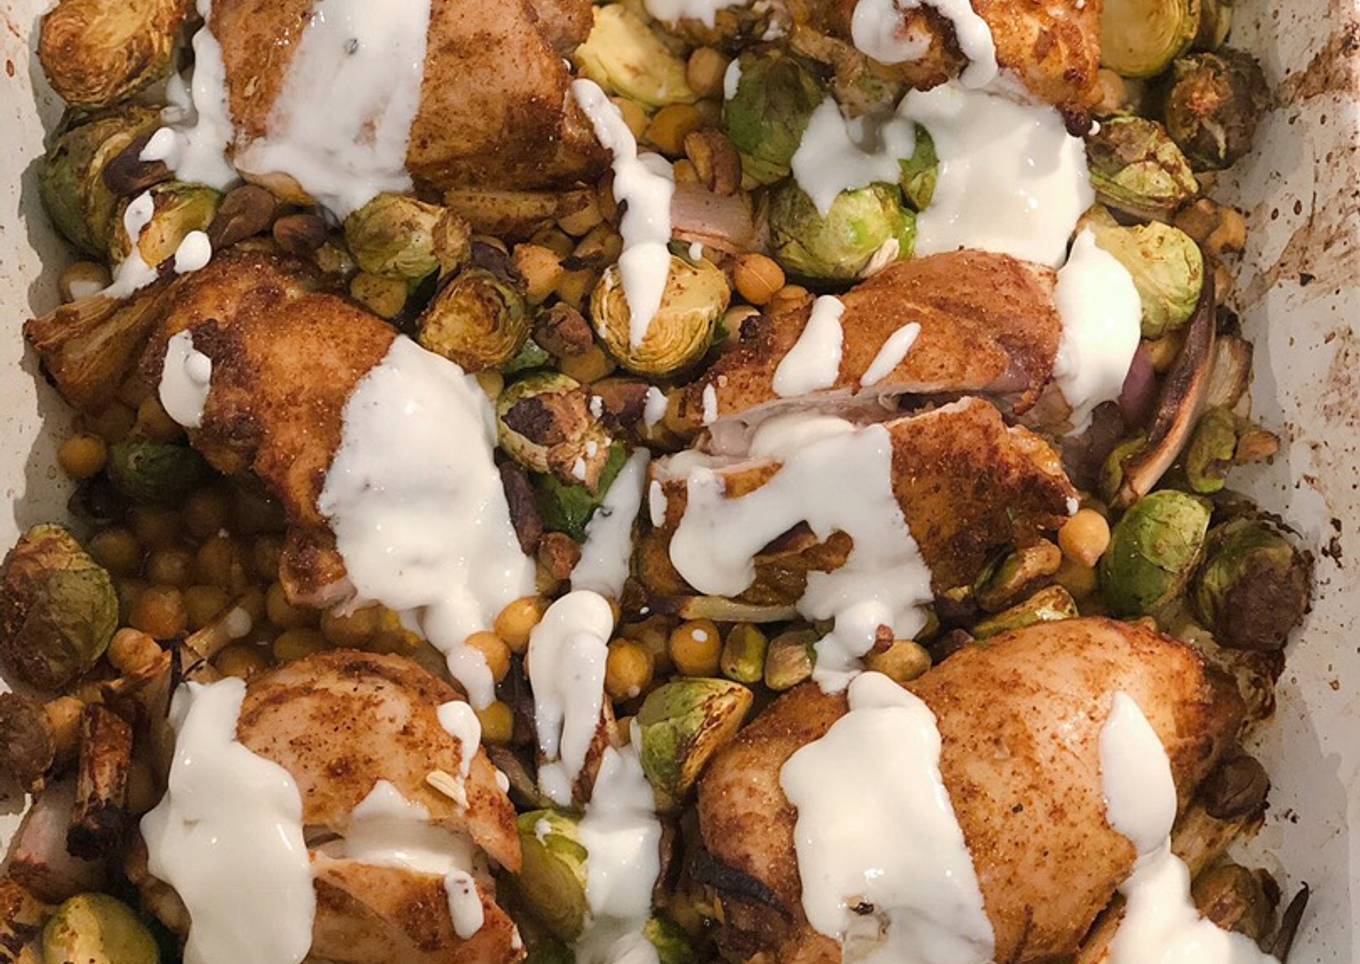 Curried chicken, sprouts and chickpeas with honey lemon yogurt